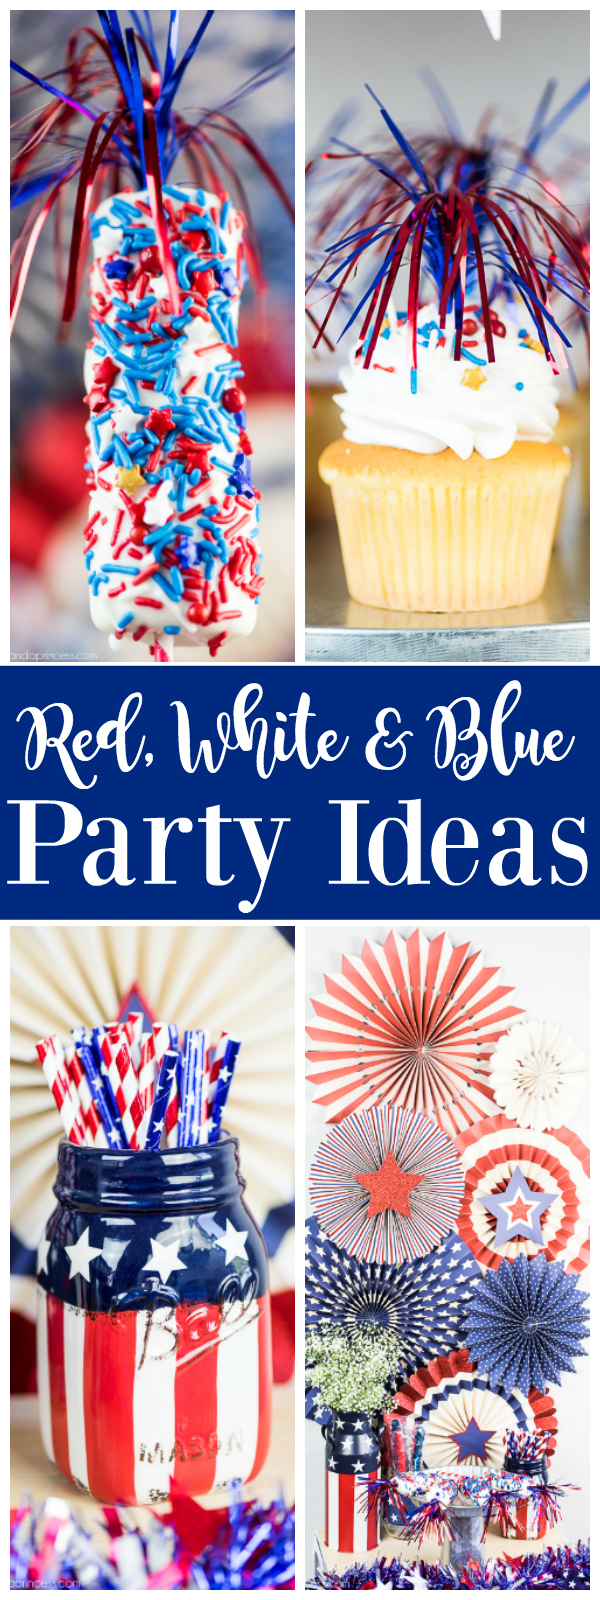 Red, White and Blue Patriotic Party Ideas - easy treats and party decor!